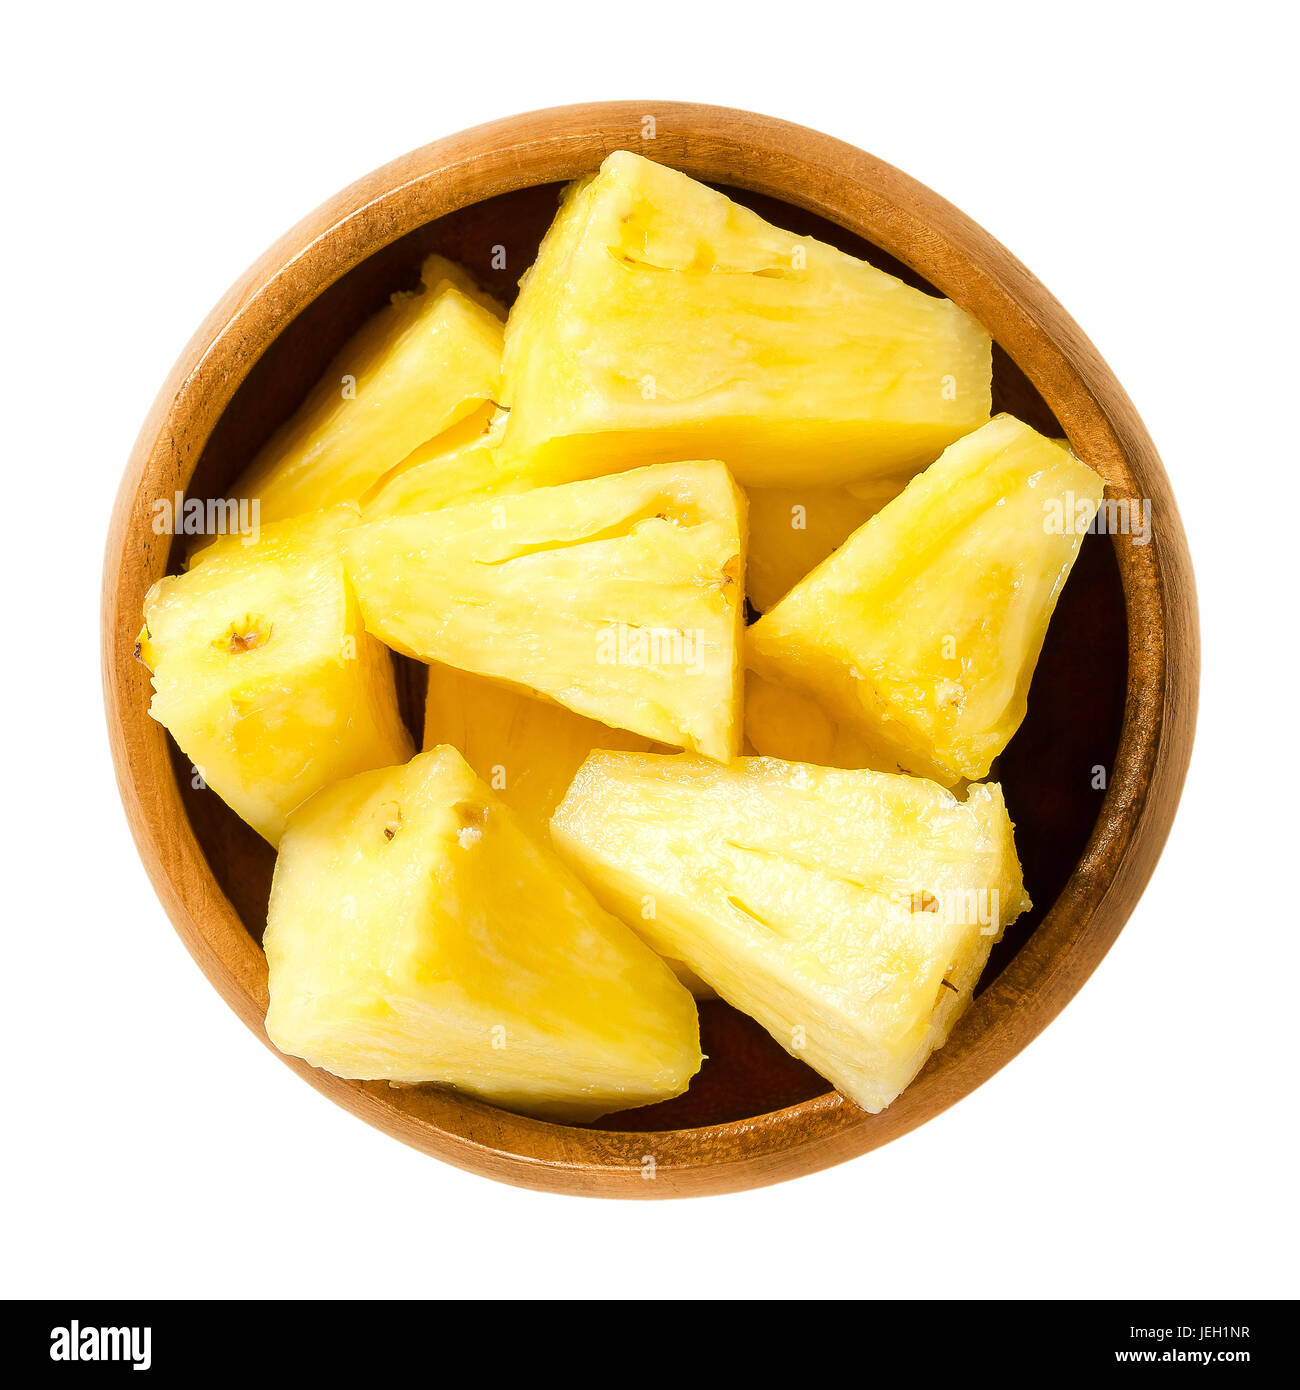 Pineapple pieces in wooden bowl. Ananas comosus, the edible multiple fruit of a tropical plant, consisting of coalesced berries. Yellow flesh. Photo. Stock Photo